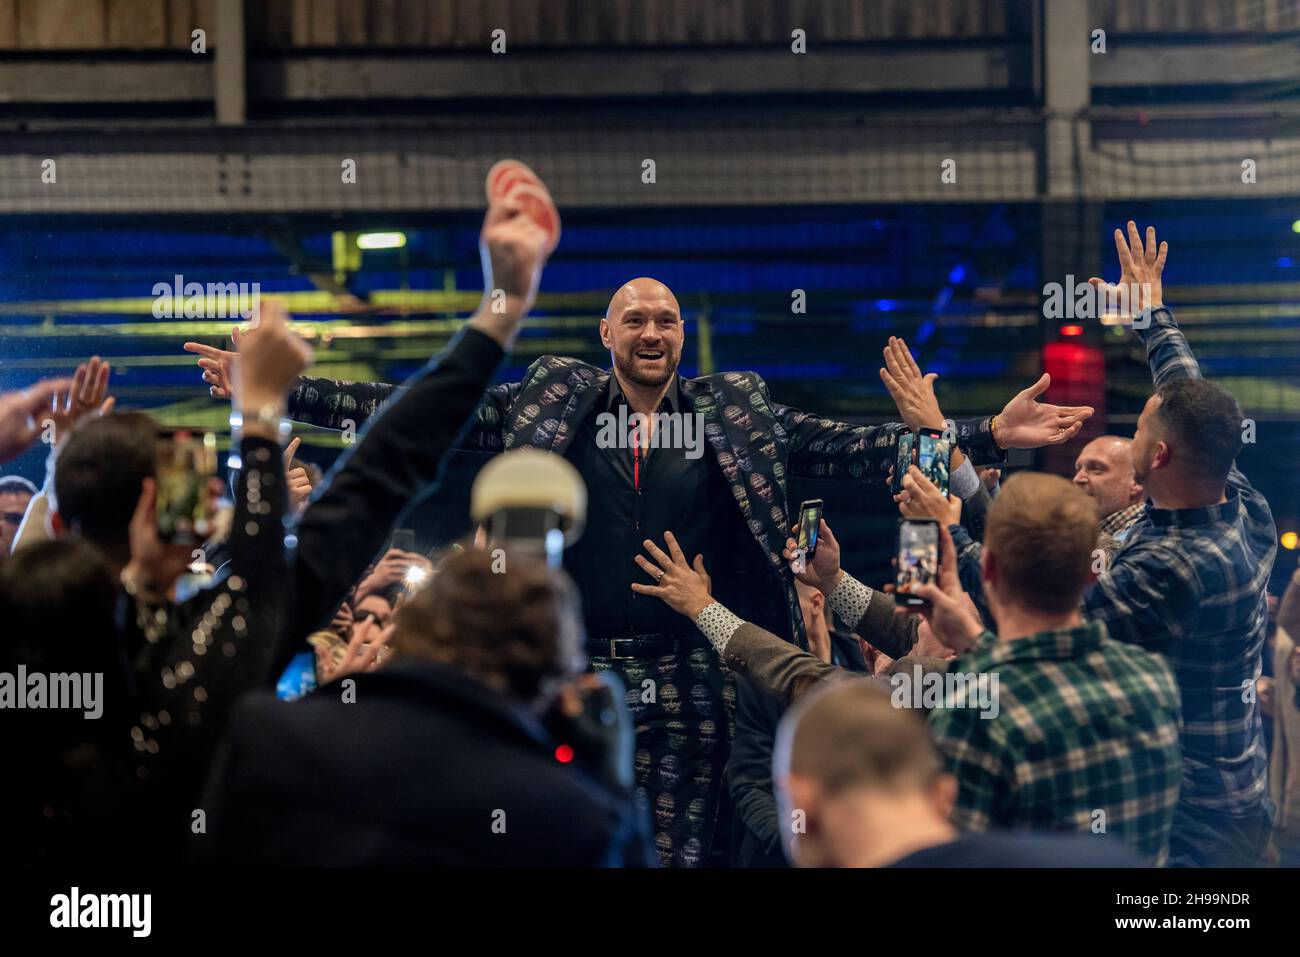 Cardiff, Wales, 5/12/21: Tyson Fury Gipsy King Homecoming Party, Cardiff Vale Sports Arena, Cardiff, Wales, 5/12/21: PIC by Andrew Dowling Photography/Alamy Live News Stockfoto